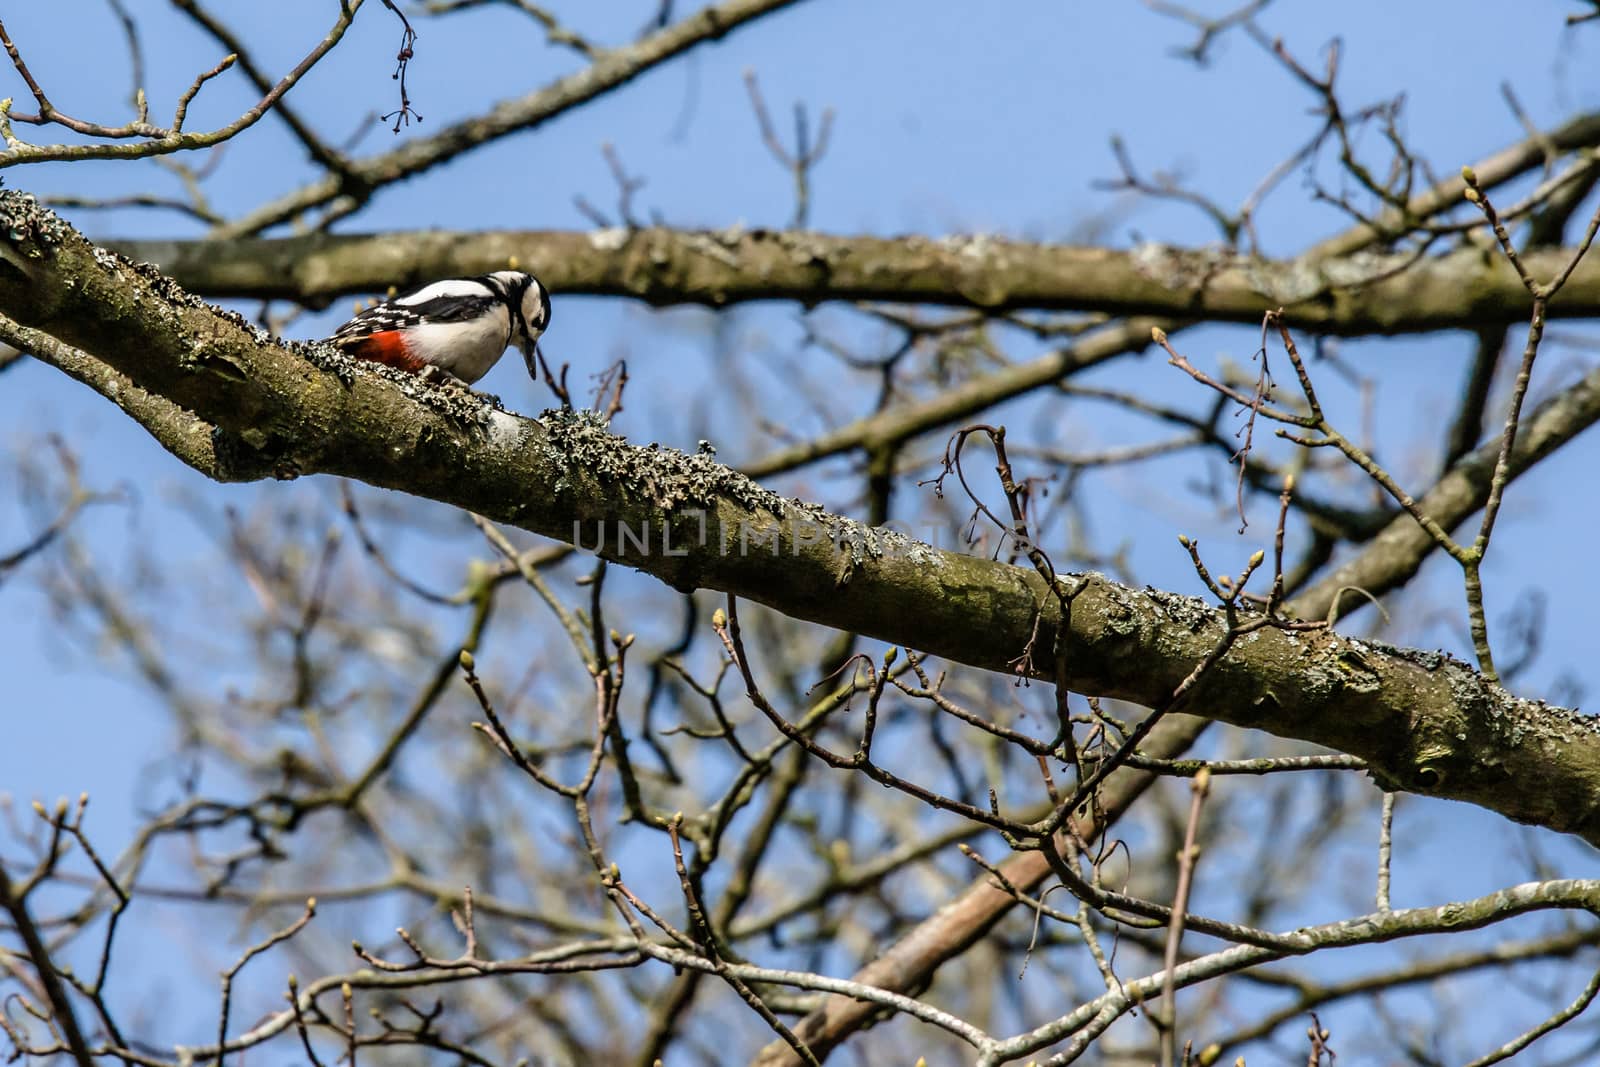 Woodpecker looking for food in a tree by Sportactive